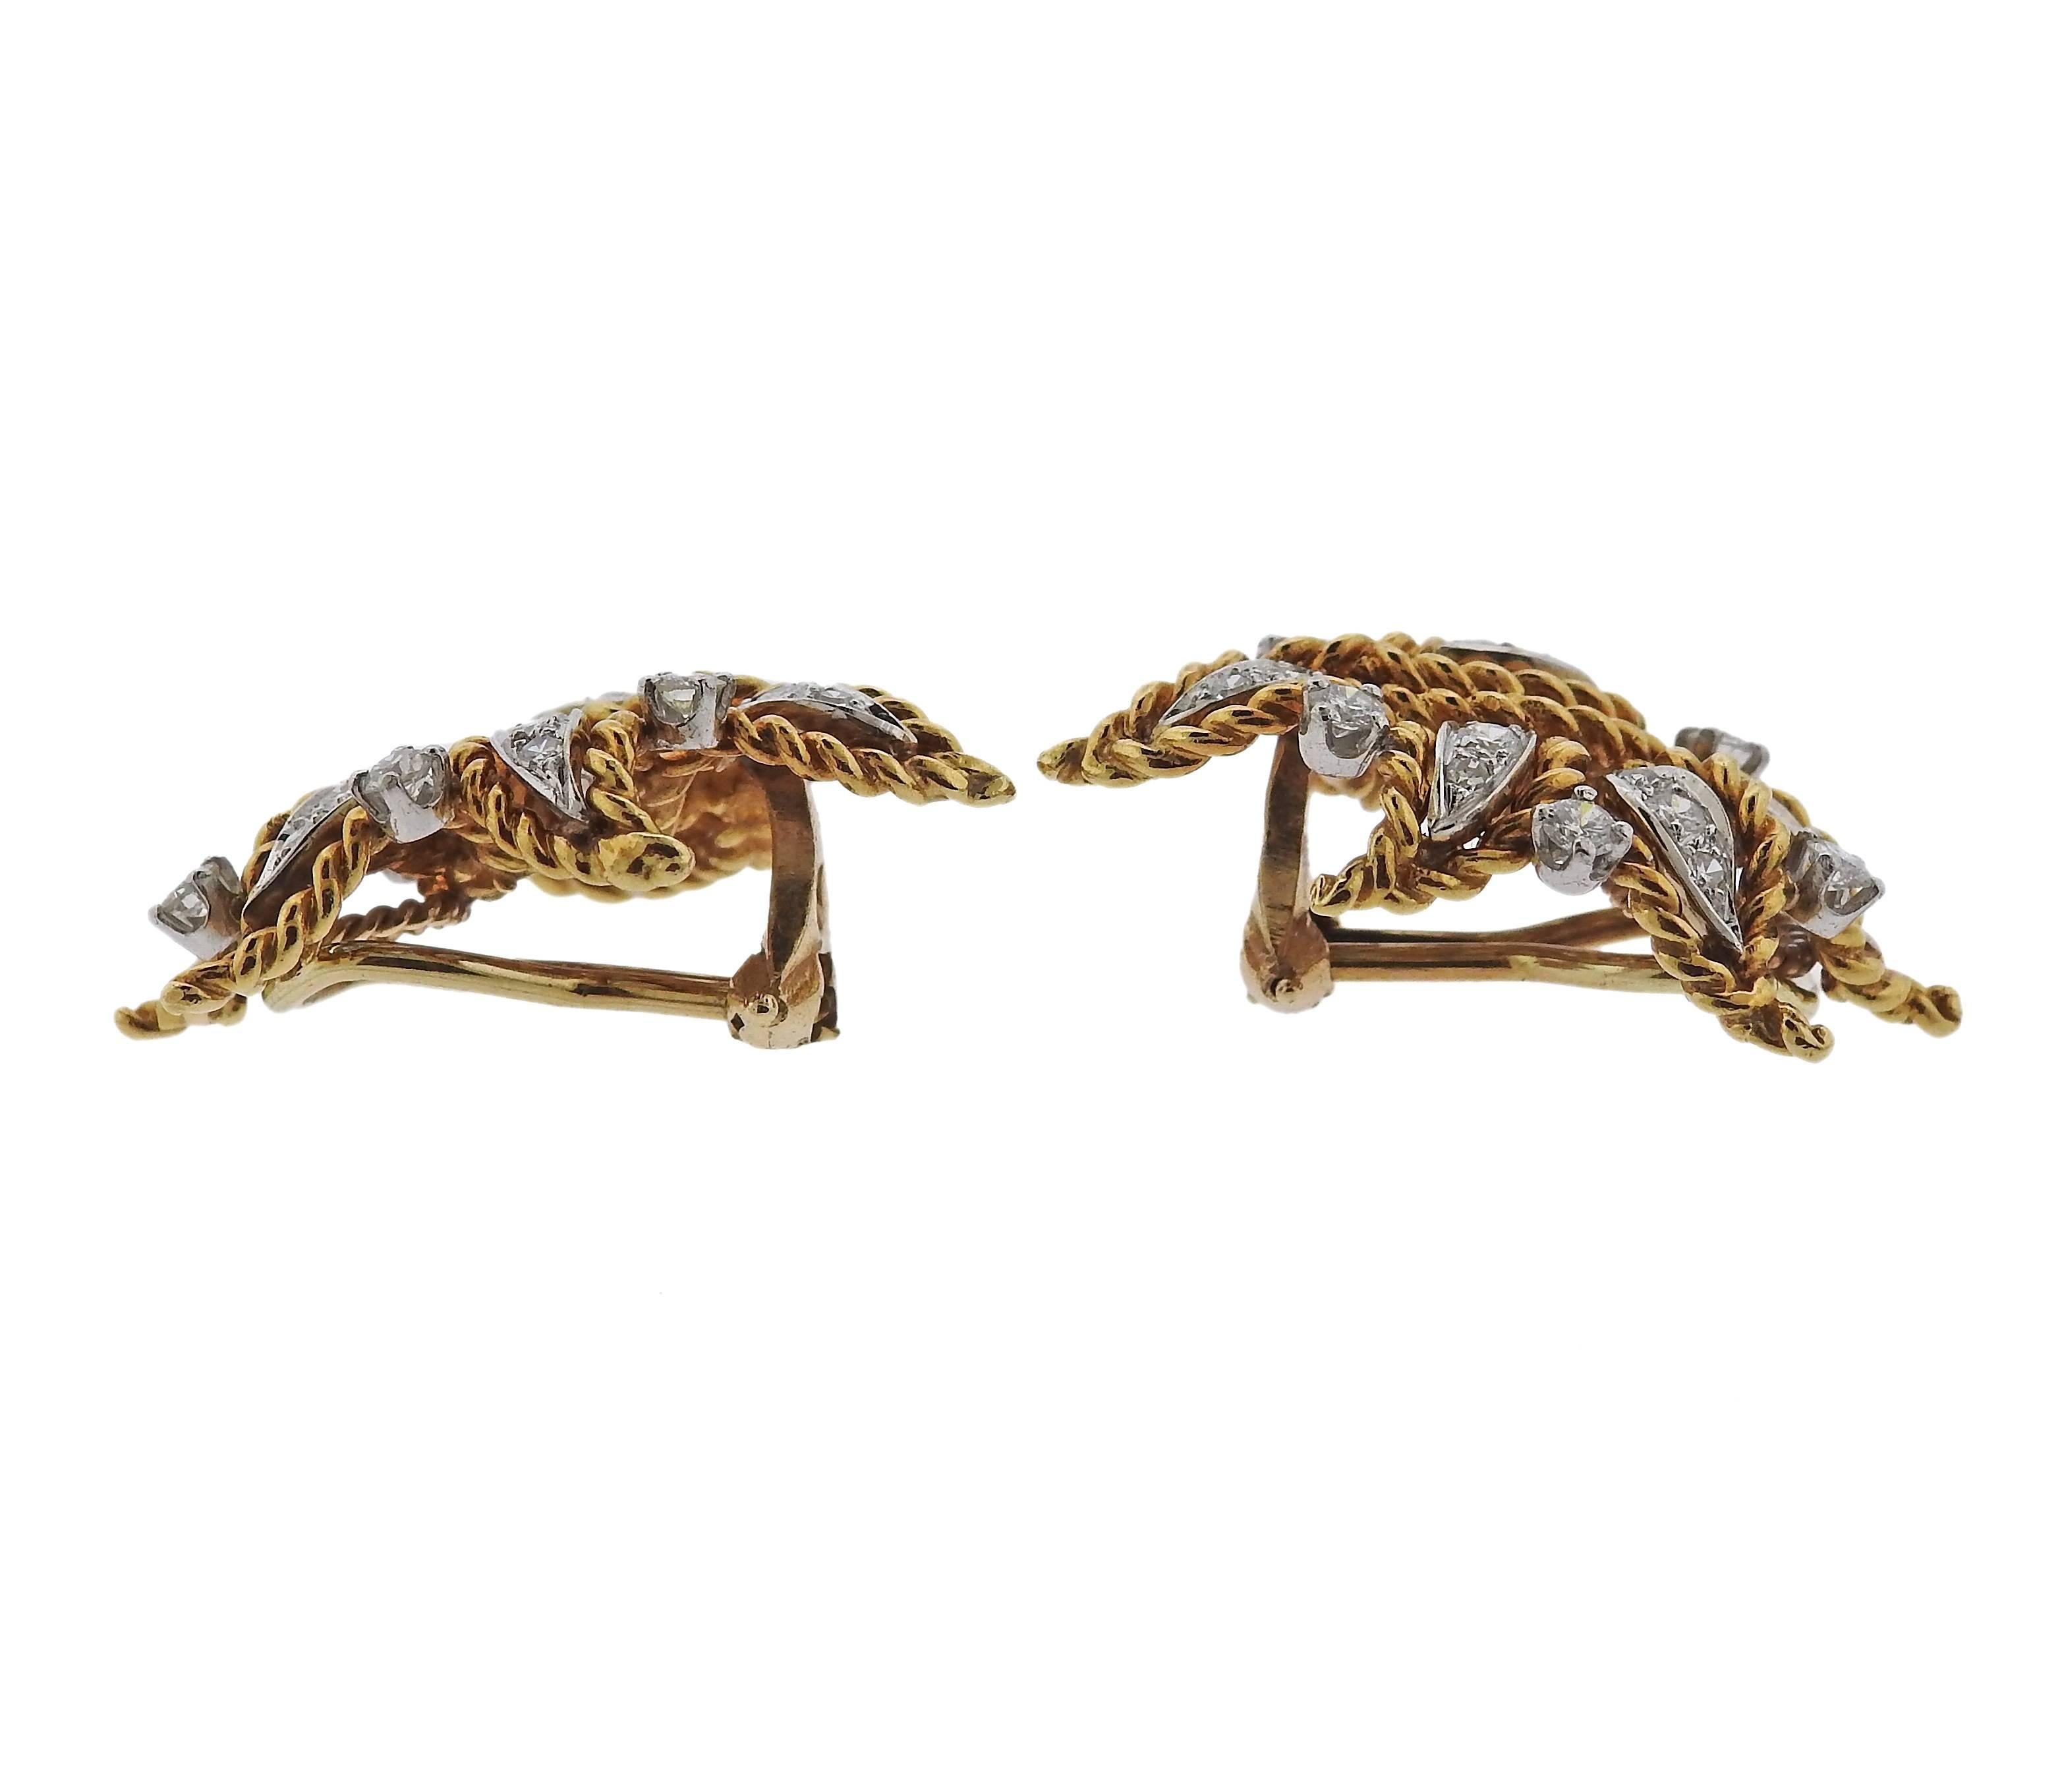 A pair of 18k gold earrings featuring approximately 1.10ctw of H/VS-SI1 diamonds. Earrings measure 30mm X 21mm. Marked PM tested 18k. Weight is 15 grams.